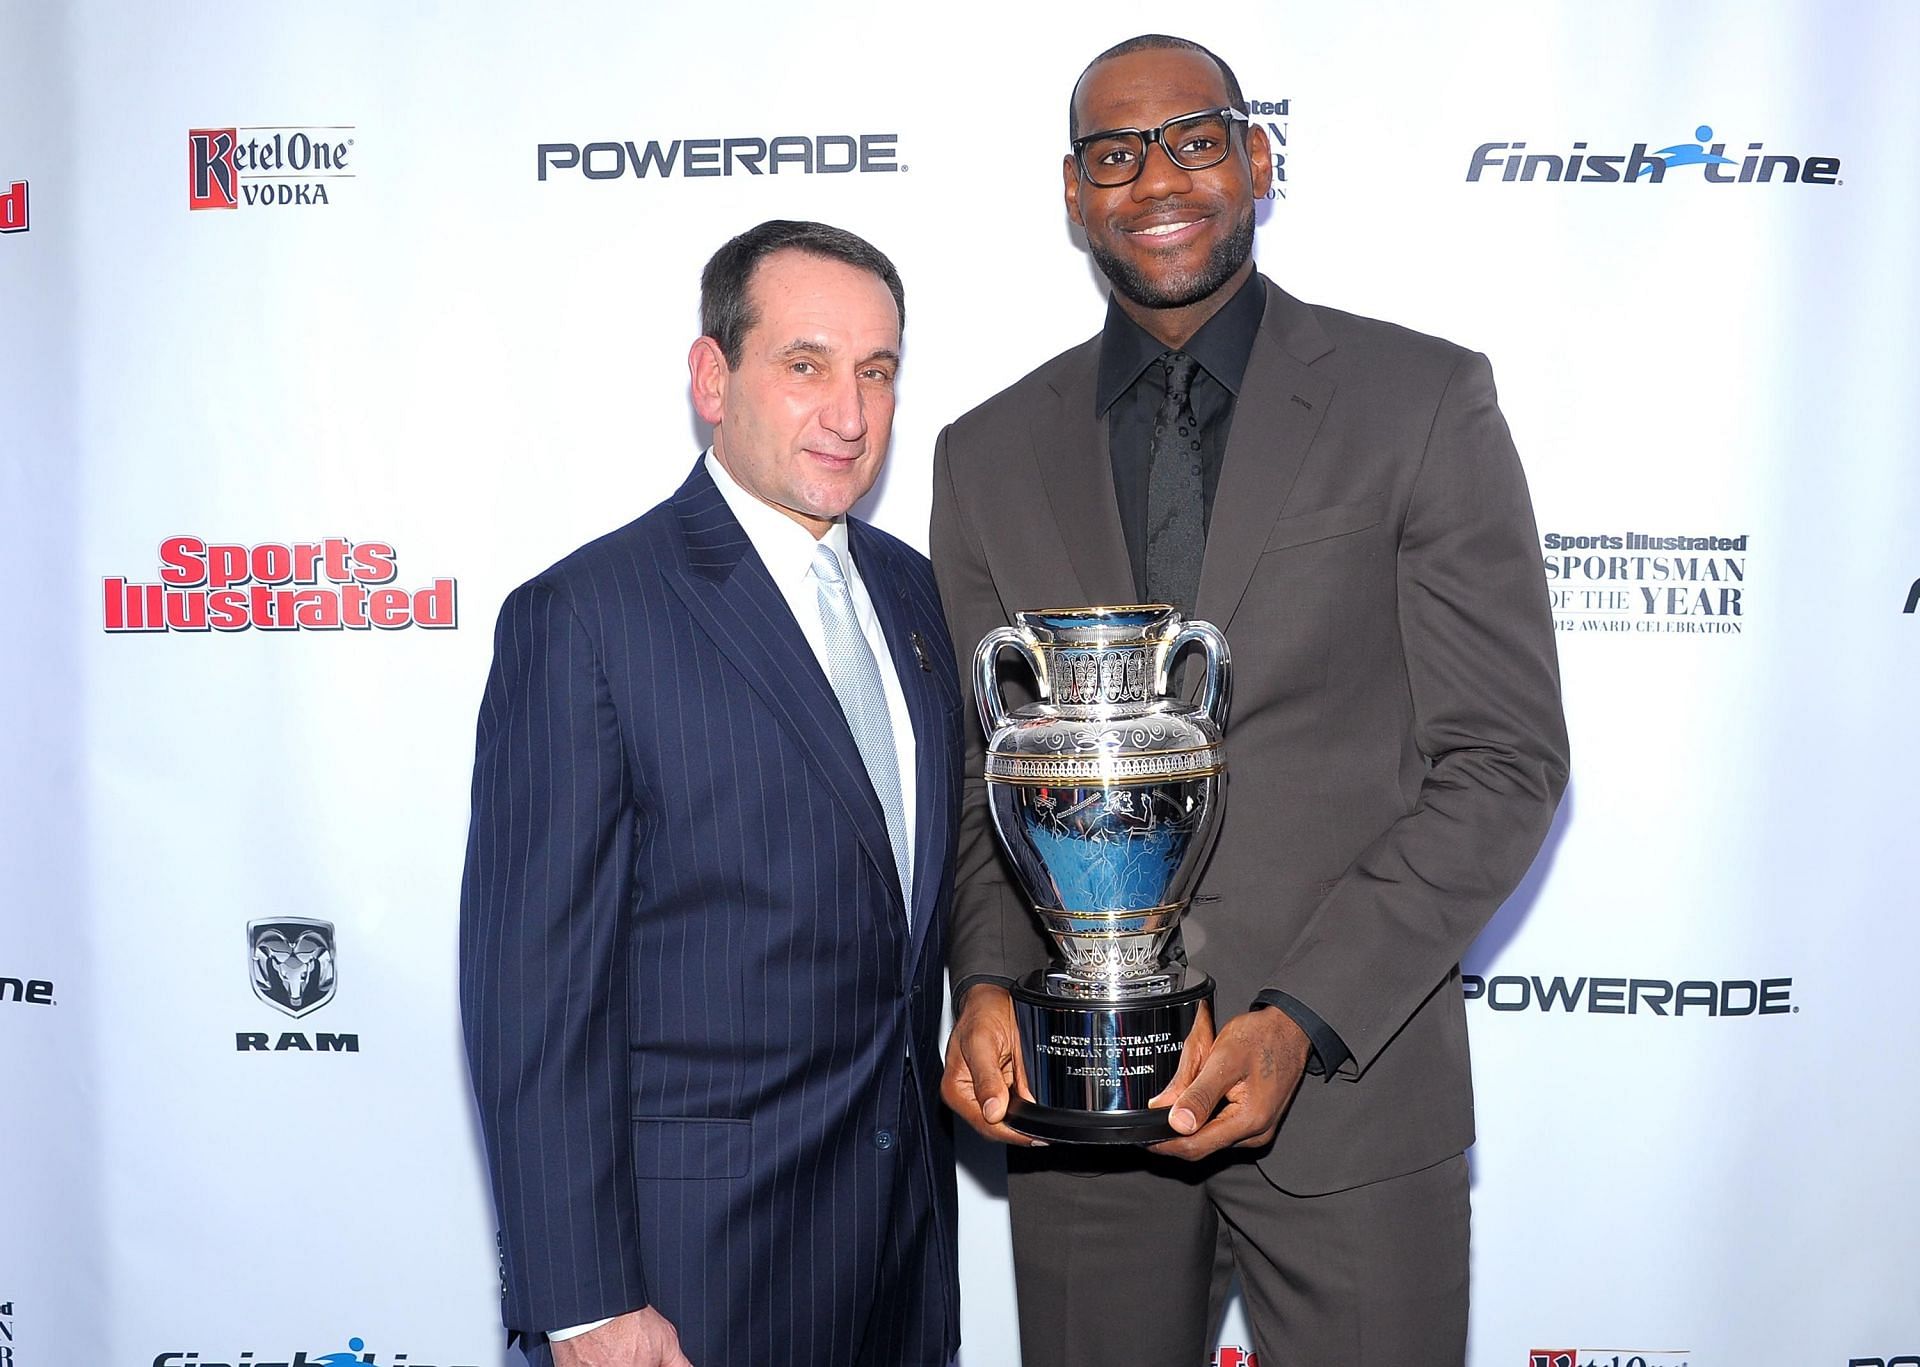 Mike Krzyzewski and LeBron James (right) at the 2012 SI Sportsman of The Year Award Presentation.